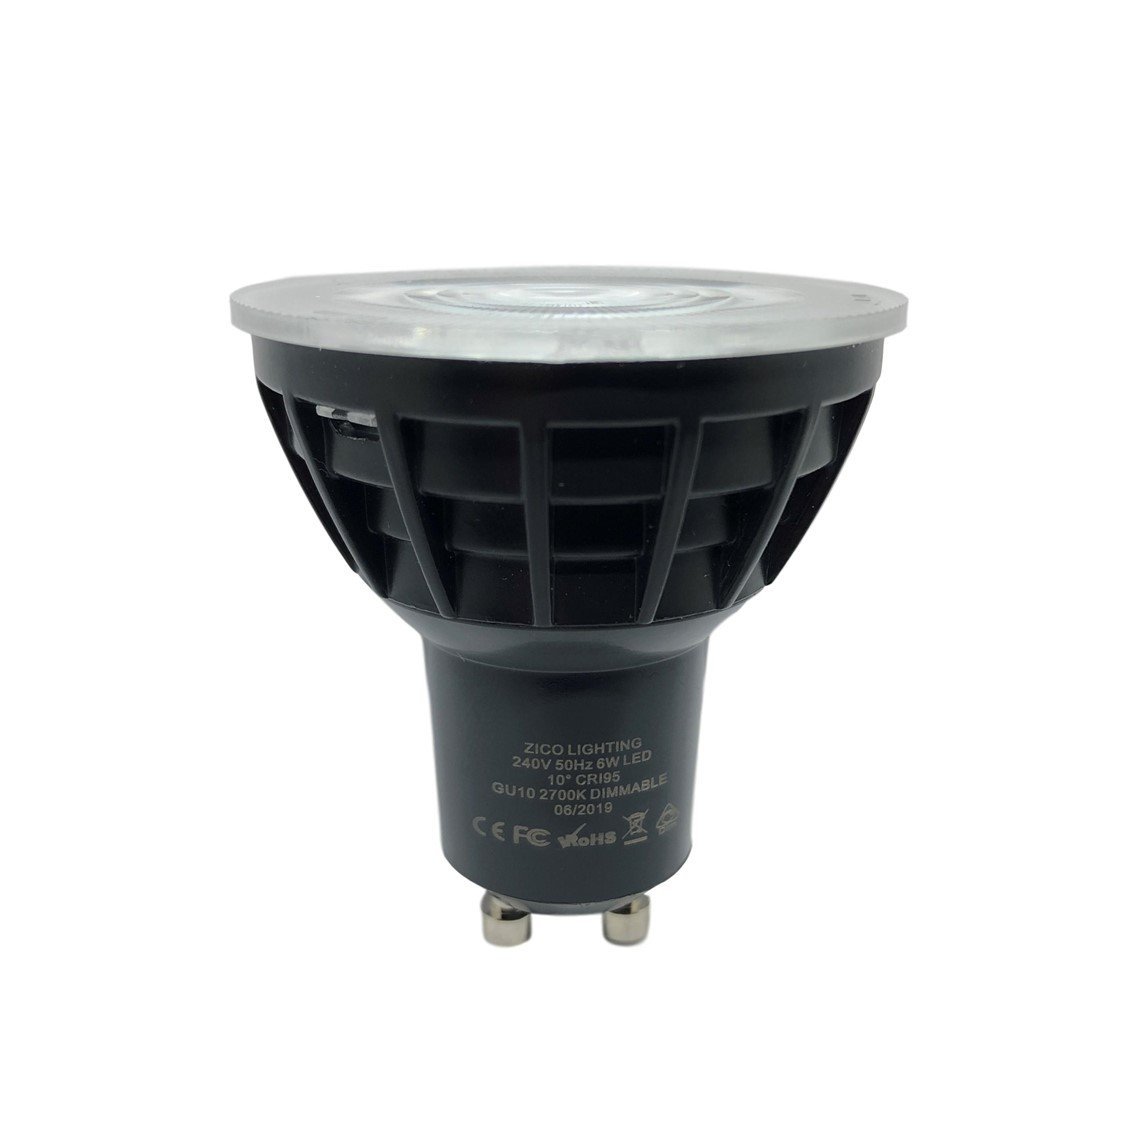 GU10 COB Dimmable 6W 2700K 10° - LED Lamp from RETROLIGHT. Made by Zico Lighting.